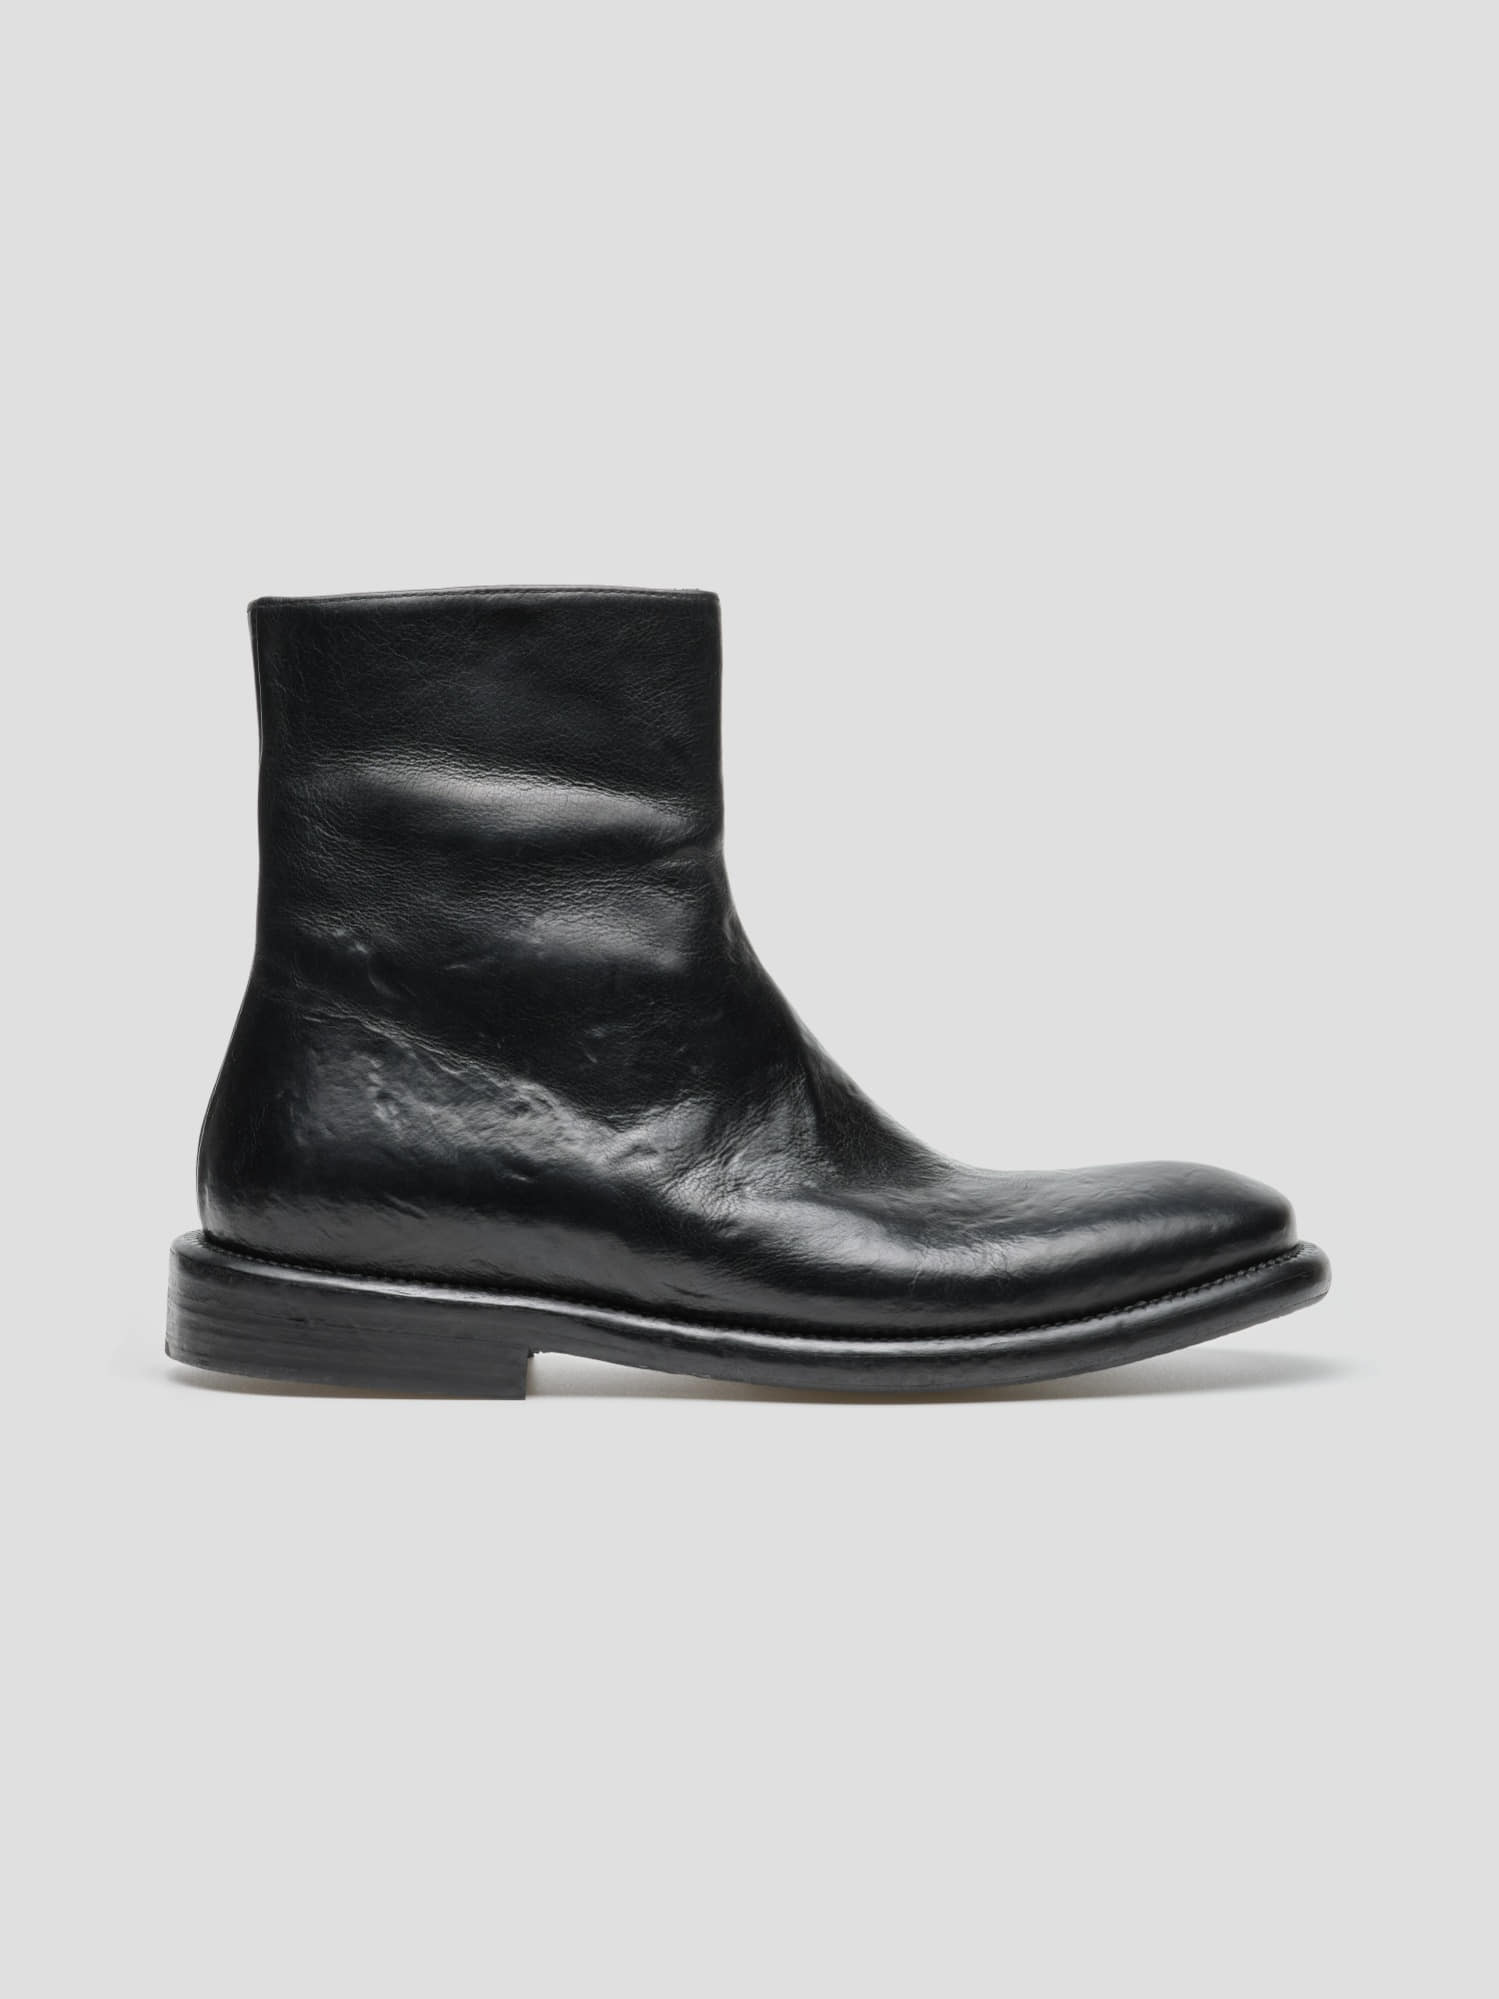 boots 01 leather black (only for men) 스니커즈와 구두